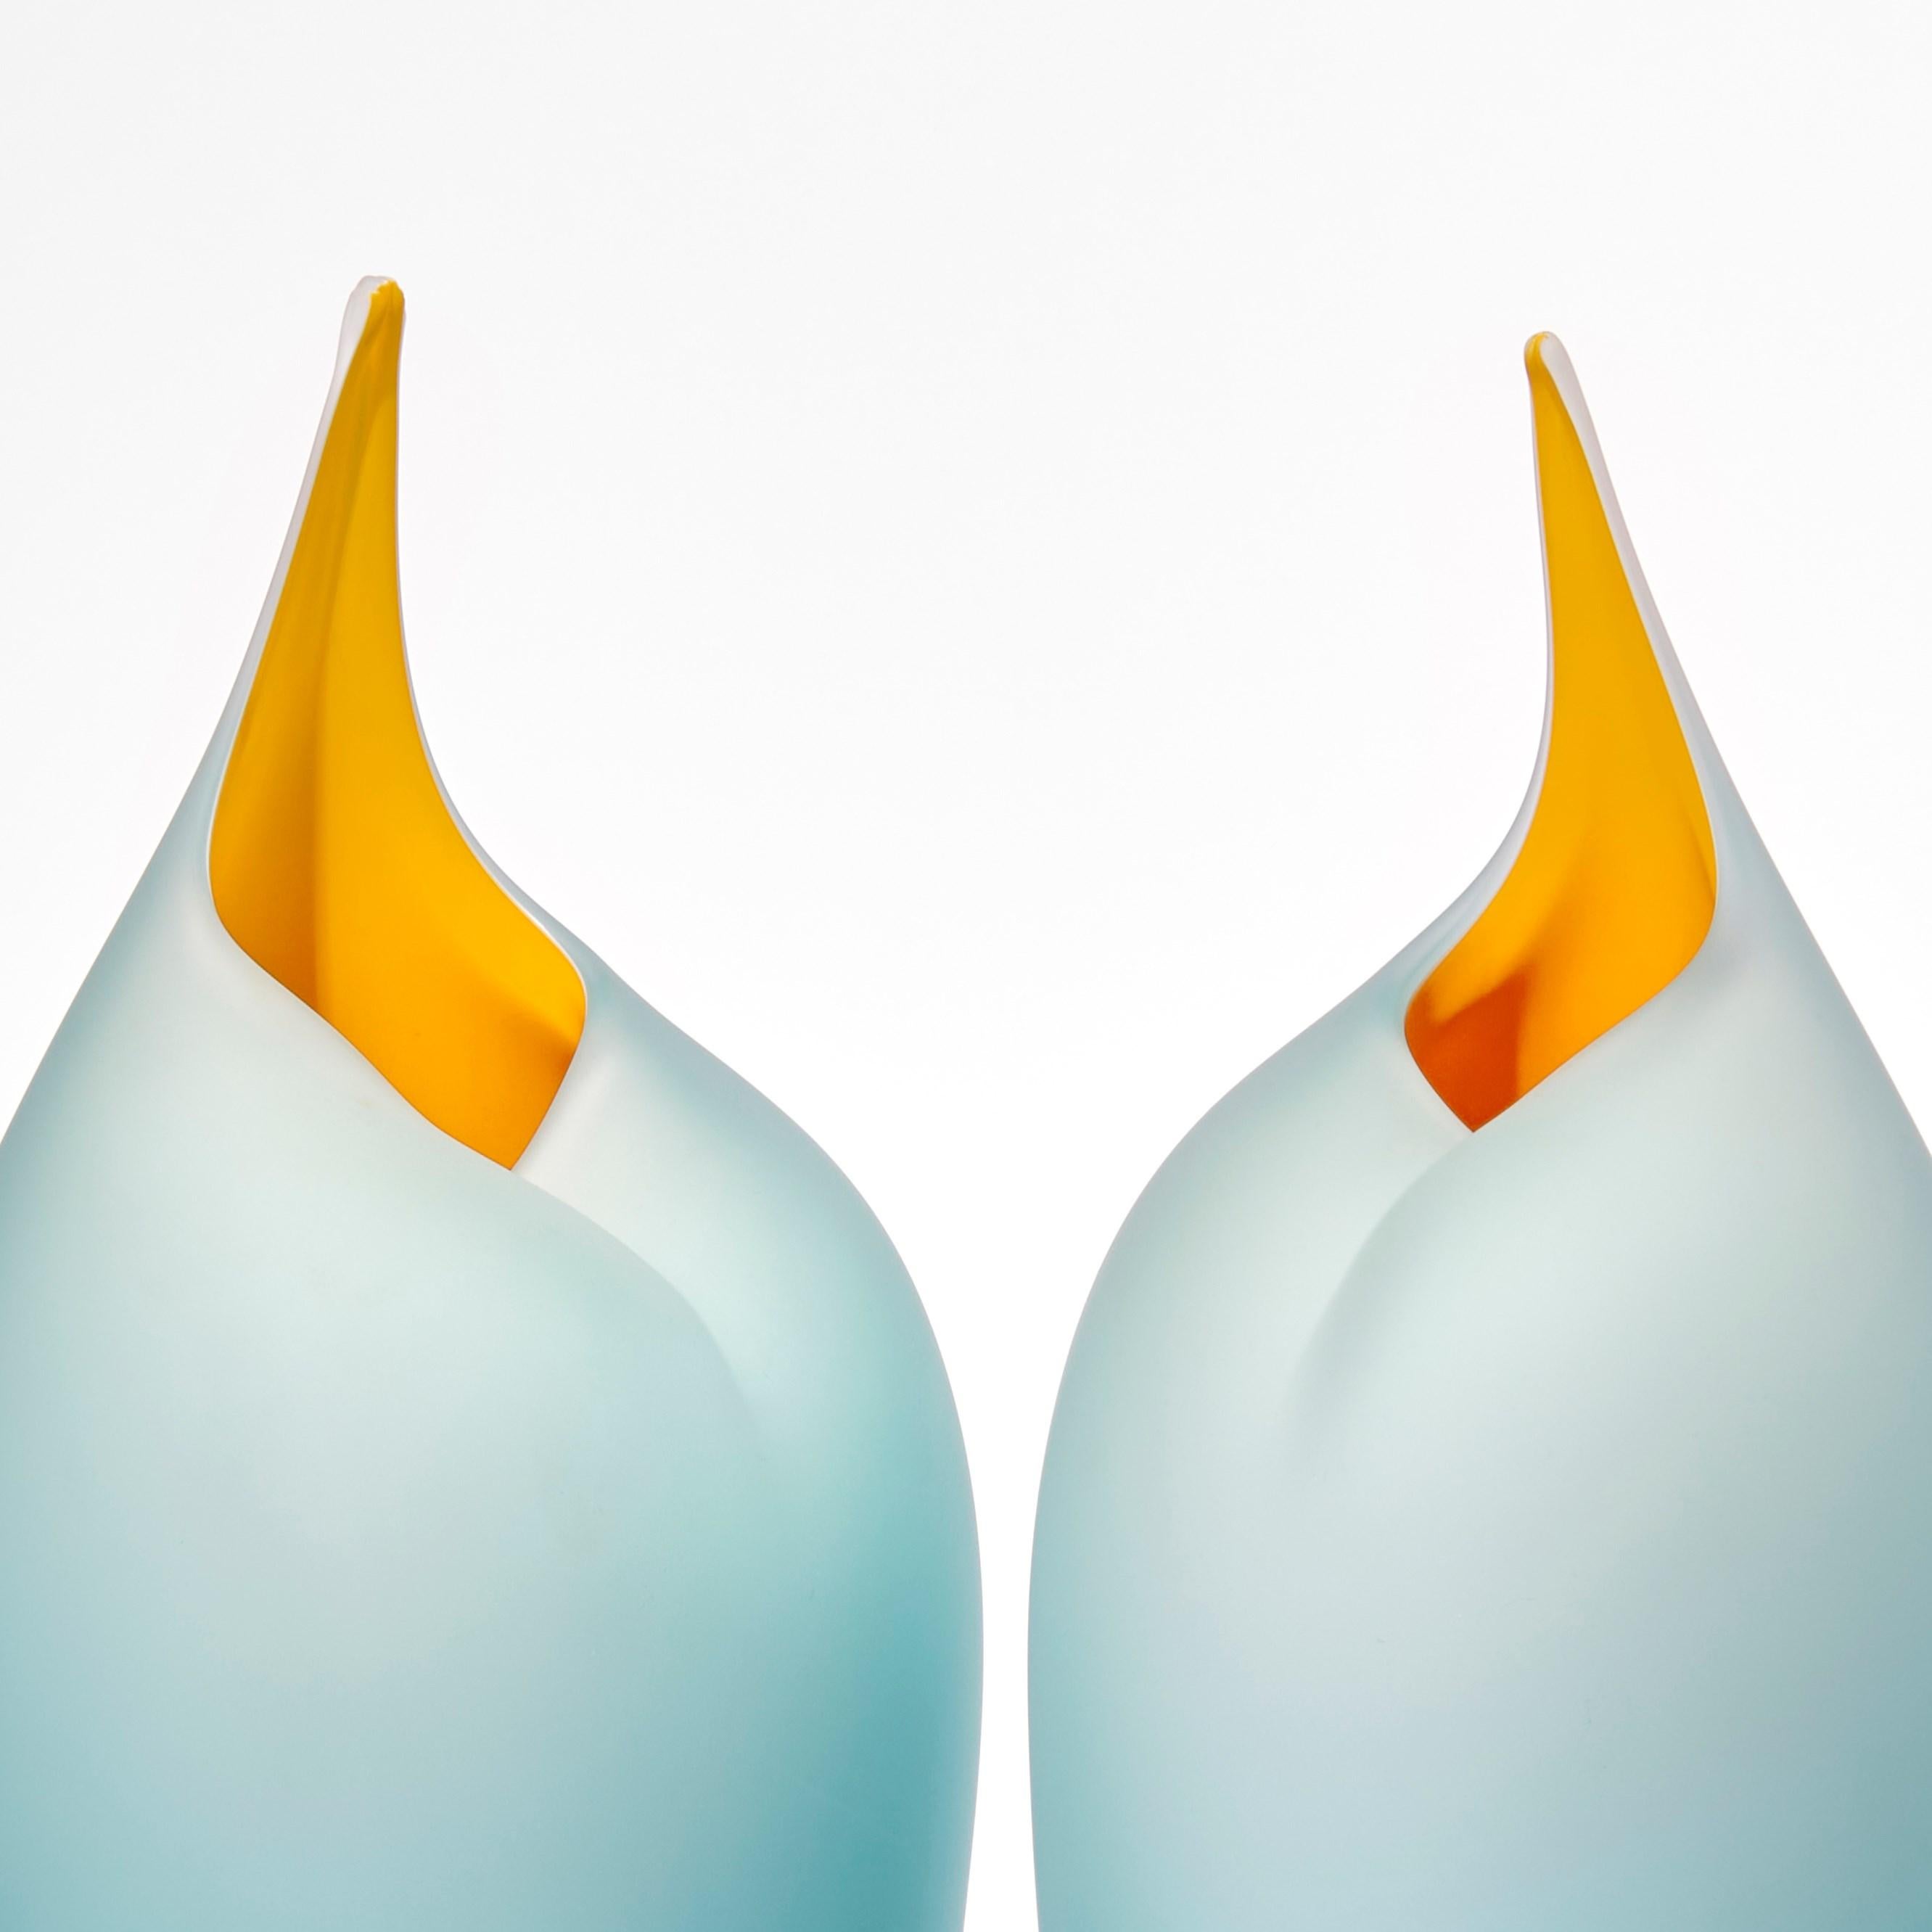 Organic Modern Tall Birds in Teal & Yellow, Pair of Glass Sculptures by Bruce Marks